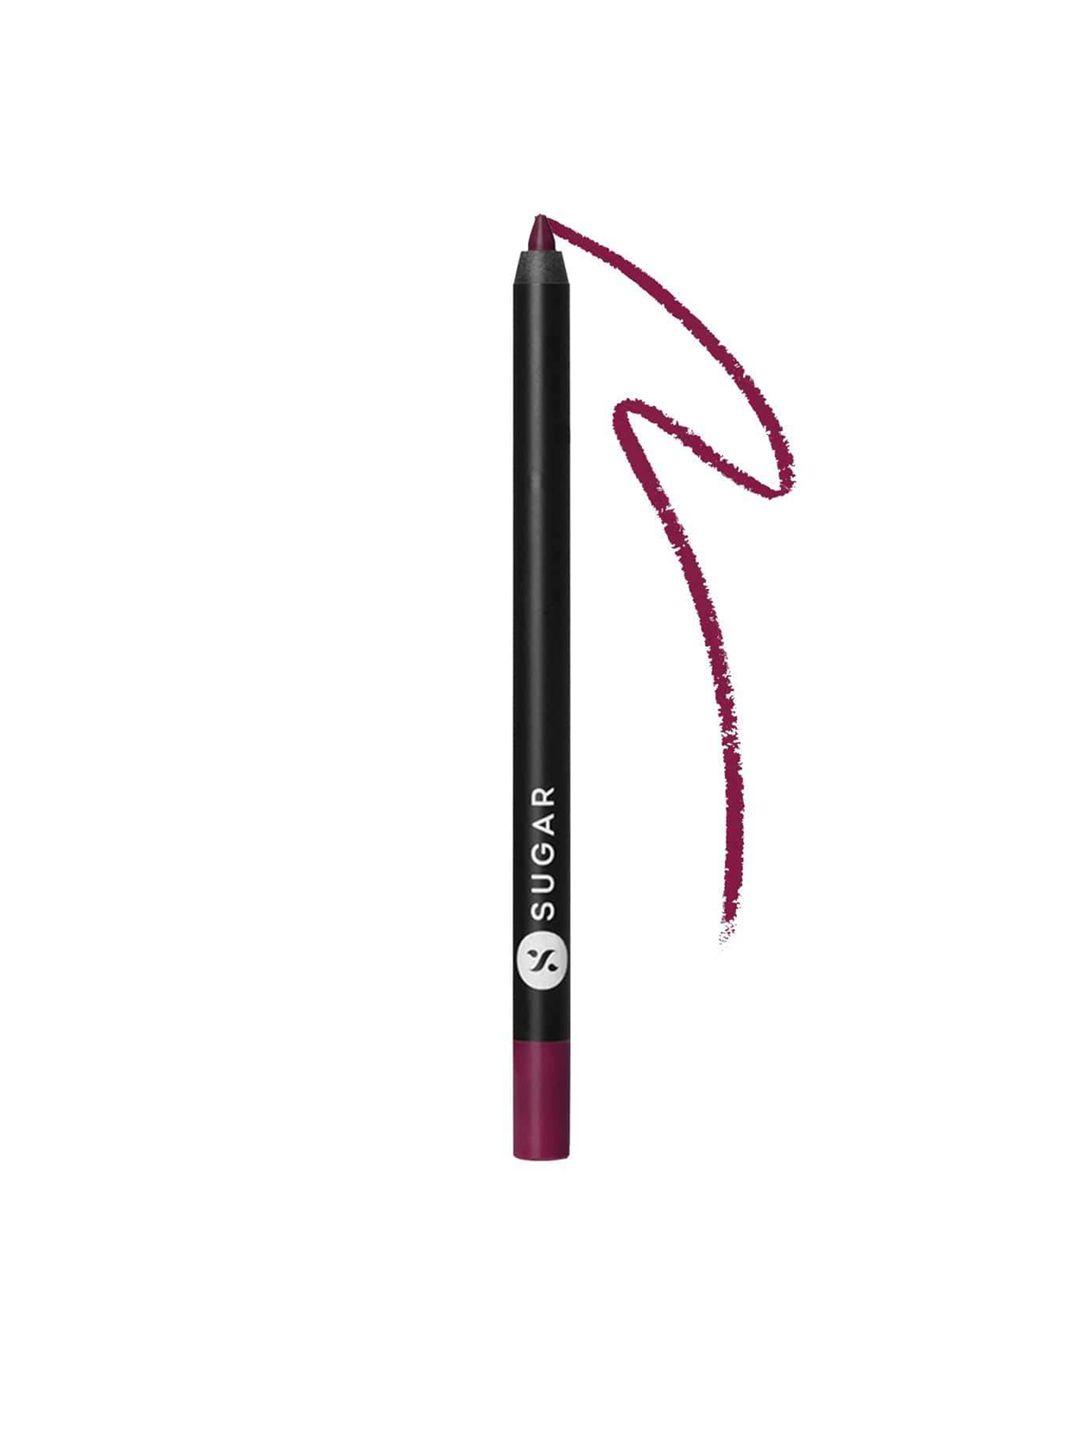 sugar cosmetics lipping on the edge lip liner - 07 fiery berry - 1.2 g